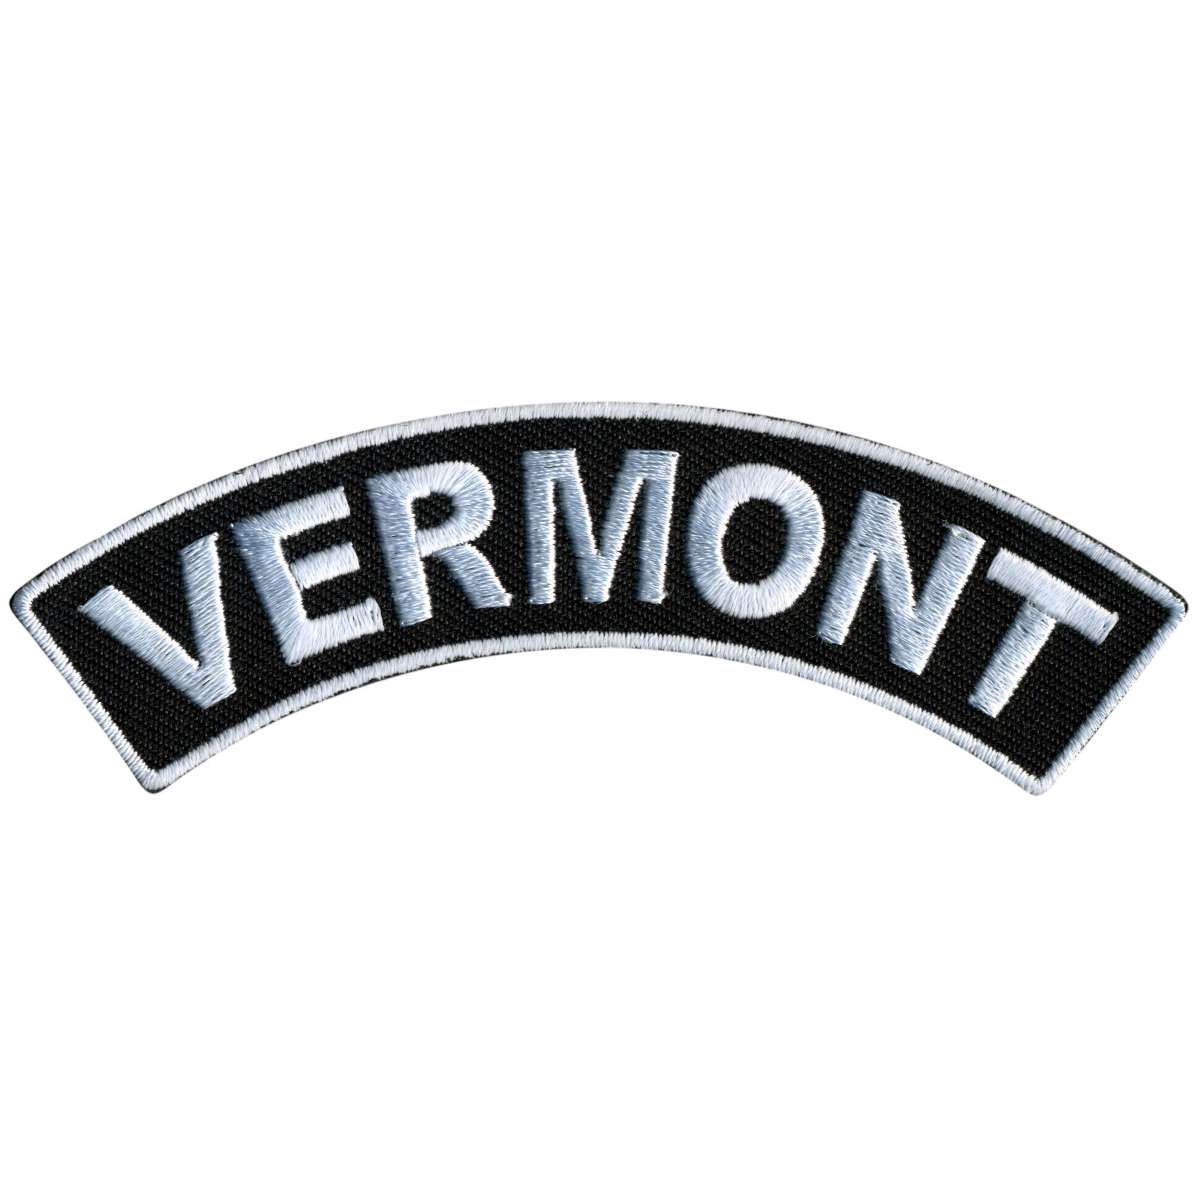 Hot Leathers Vermont 4” X 1” Top Rocker Patch PPM4090